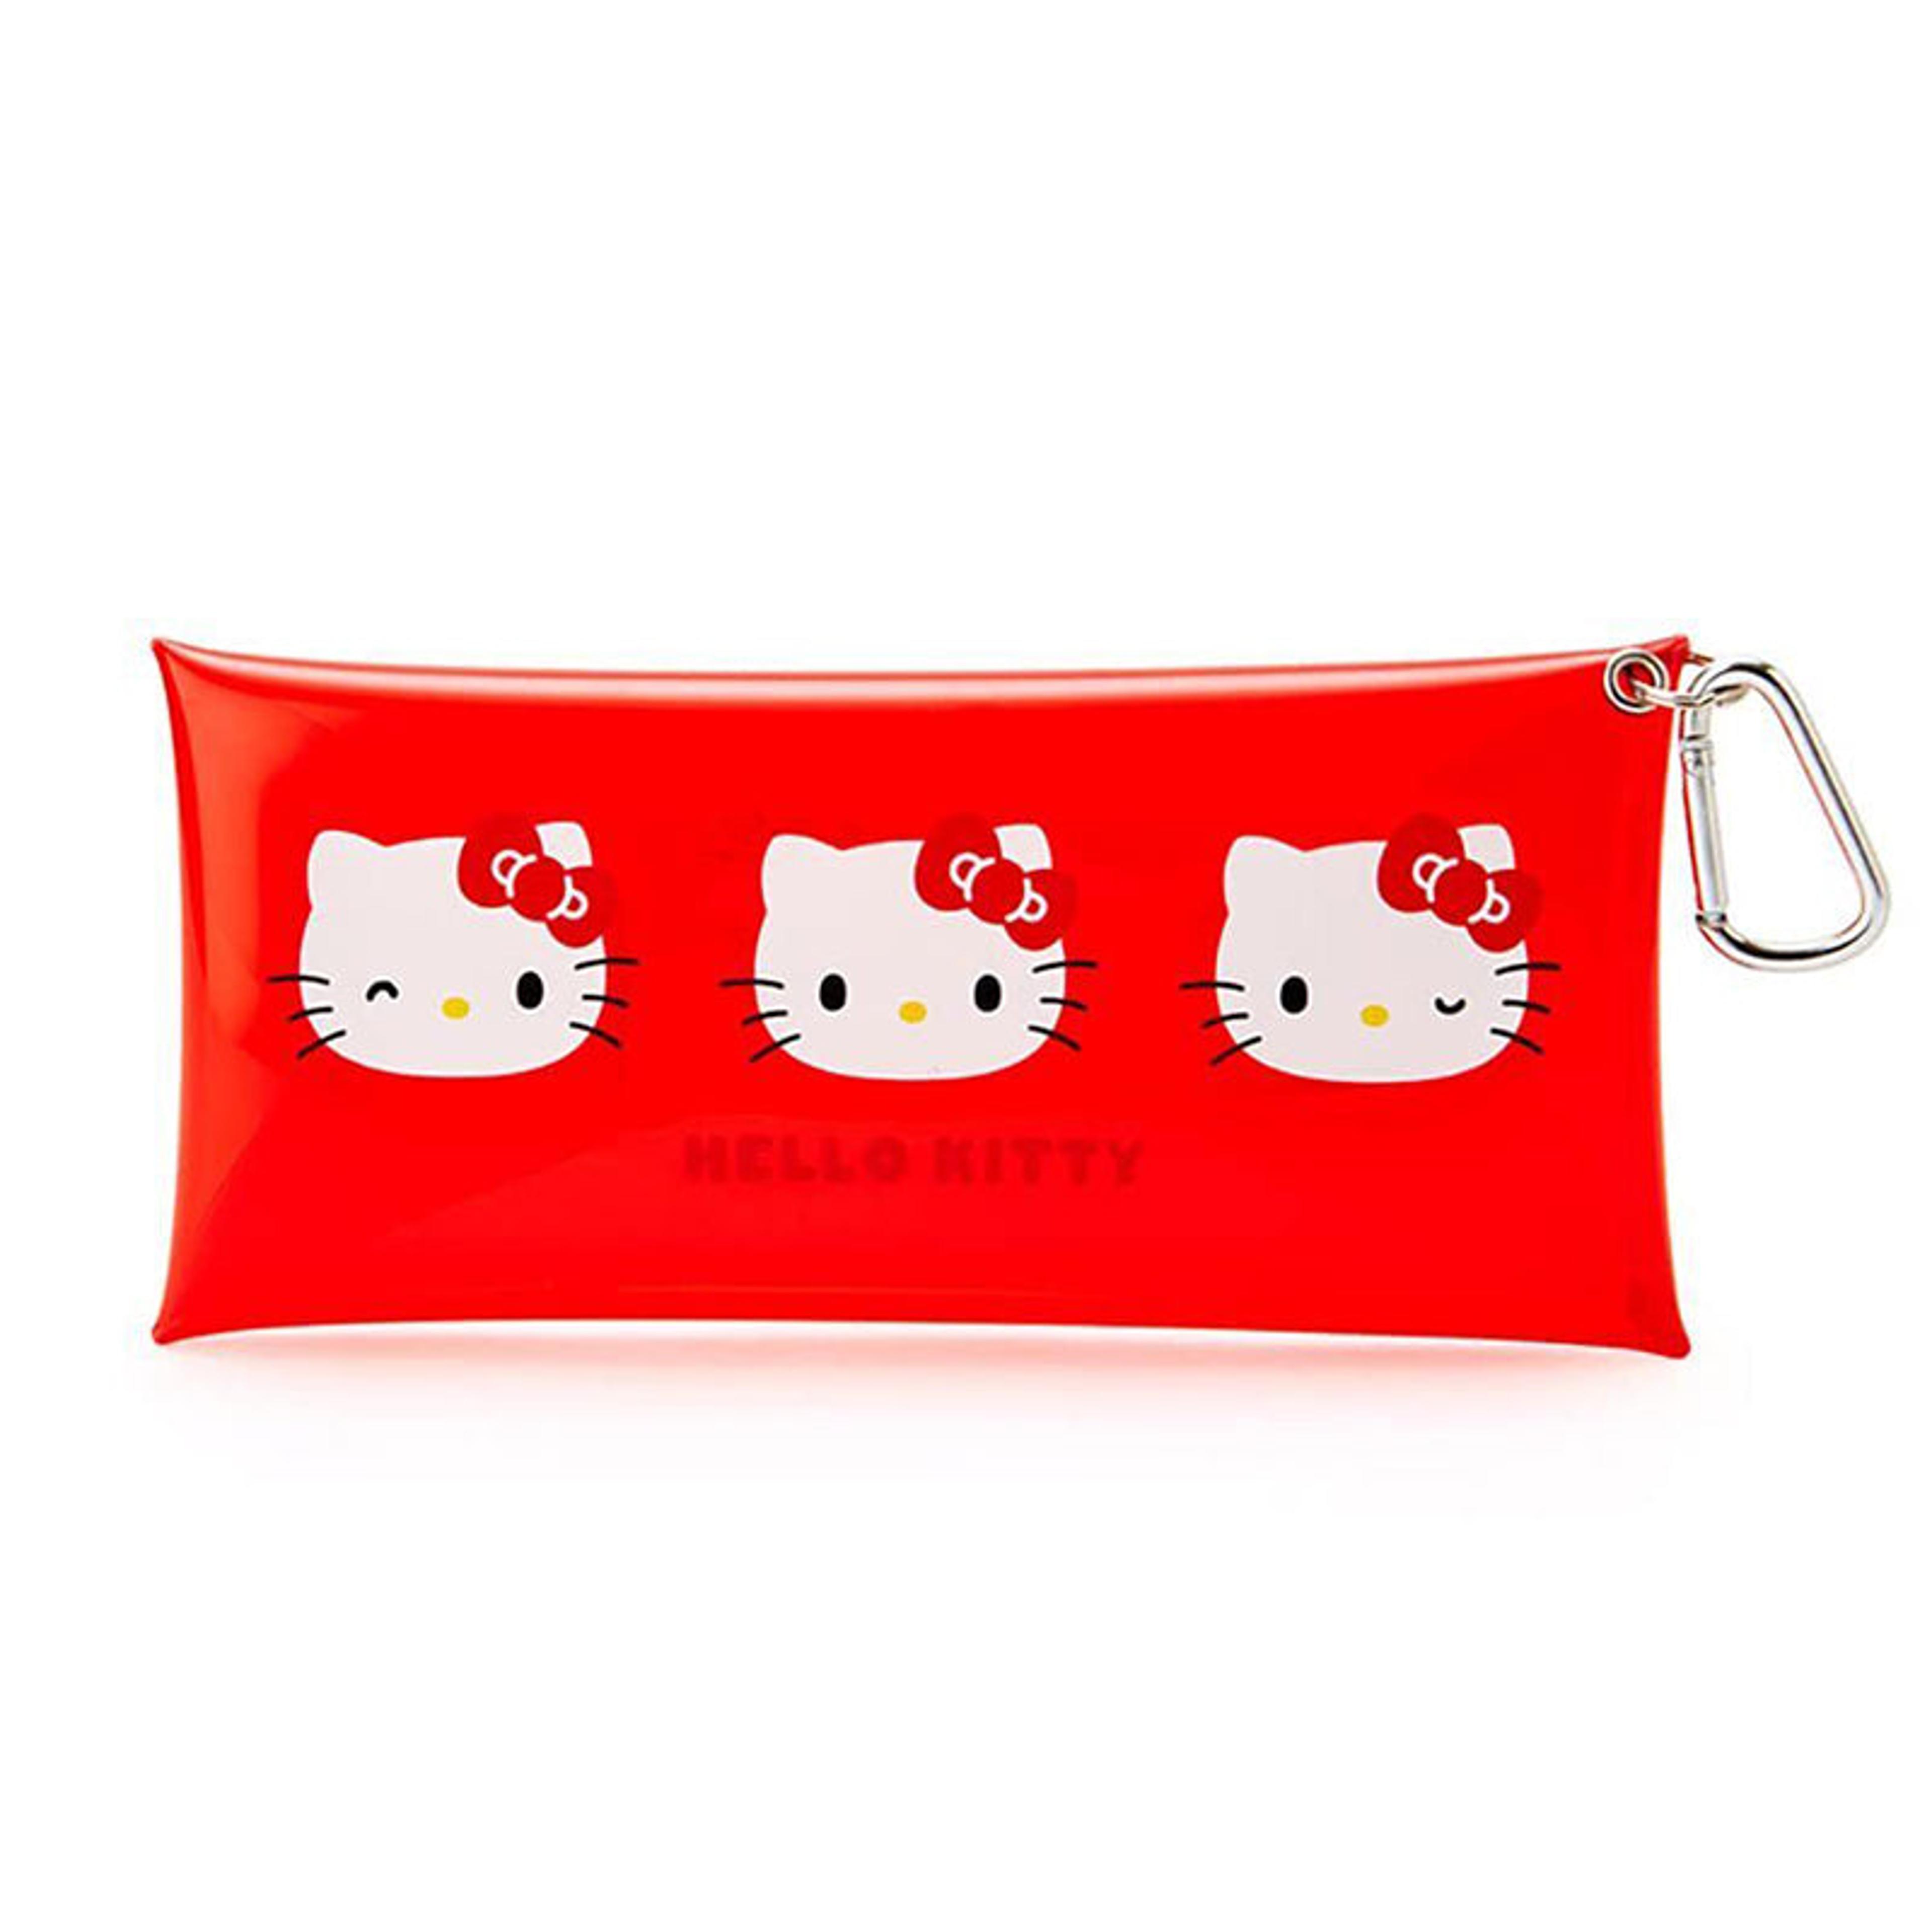 Alternate View 1 of Sanrio Characters Clear Mini Pouch